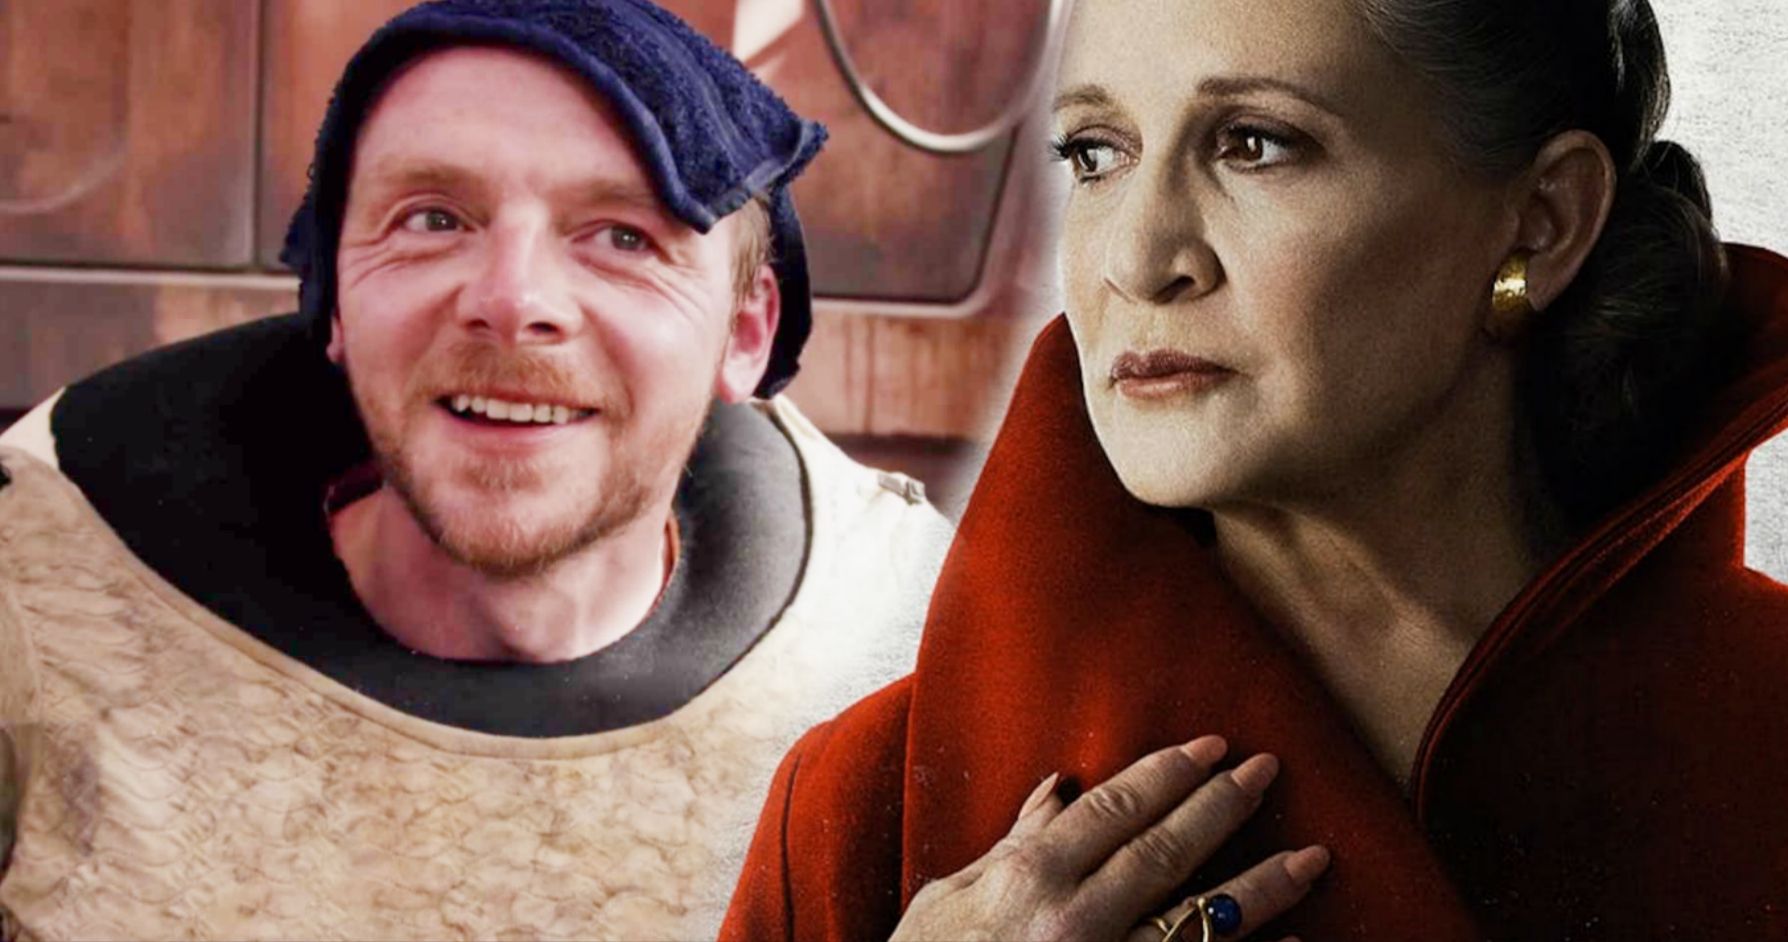 Simon Pegg Calls Meeting Carrie Fisher on Star Wars Set the Best Day of His Life